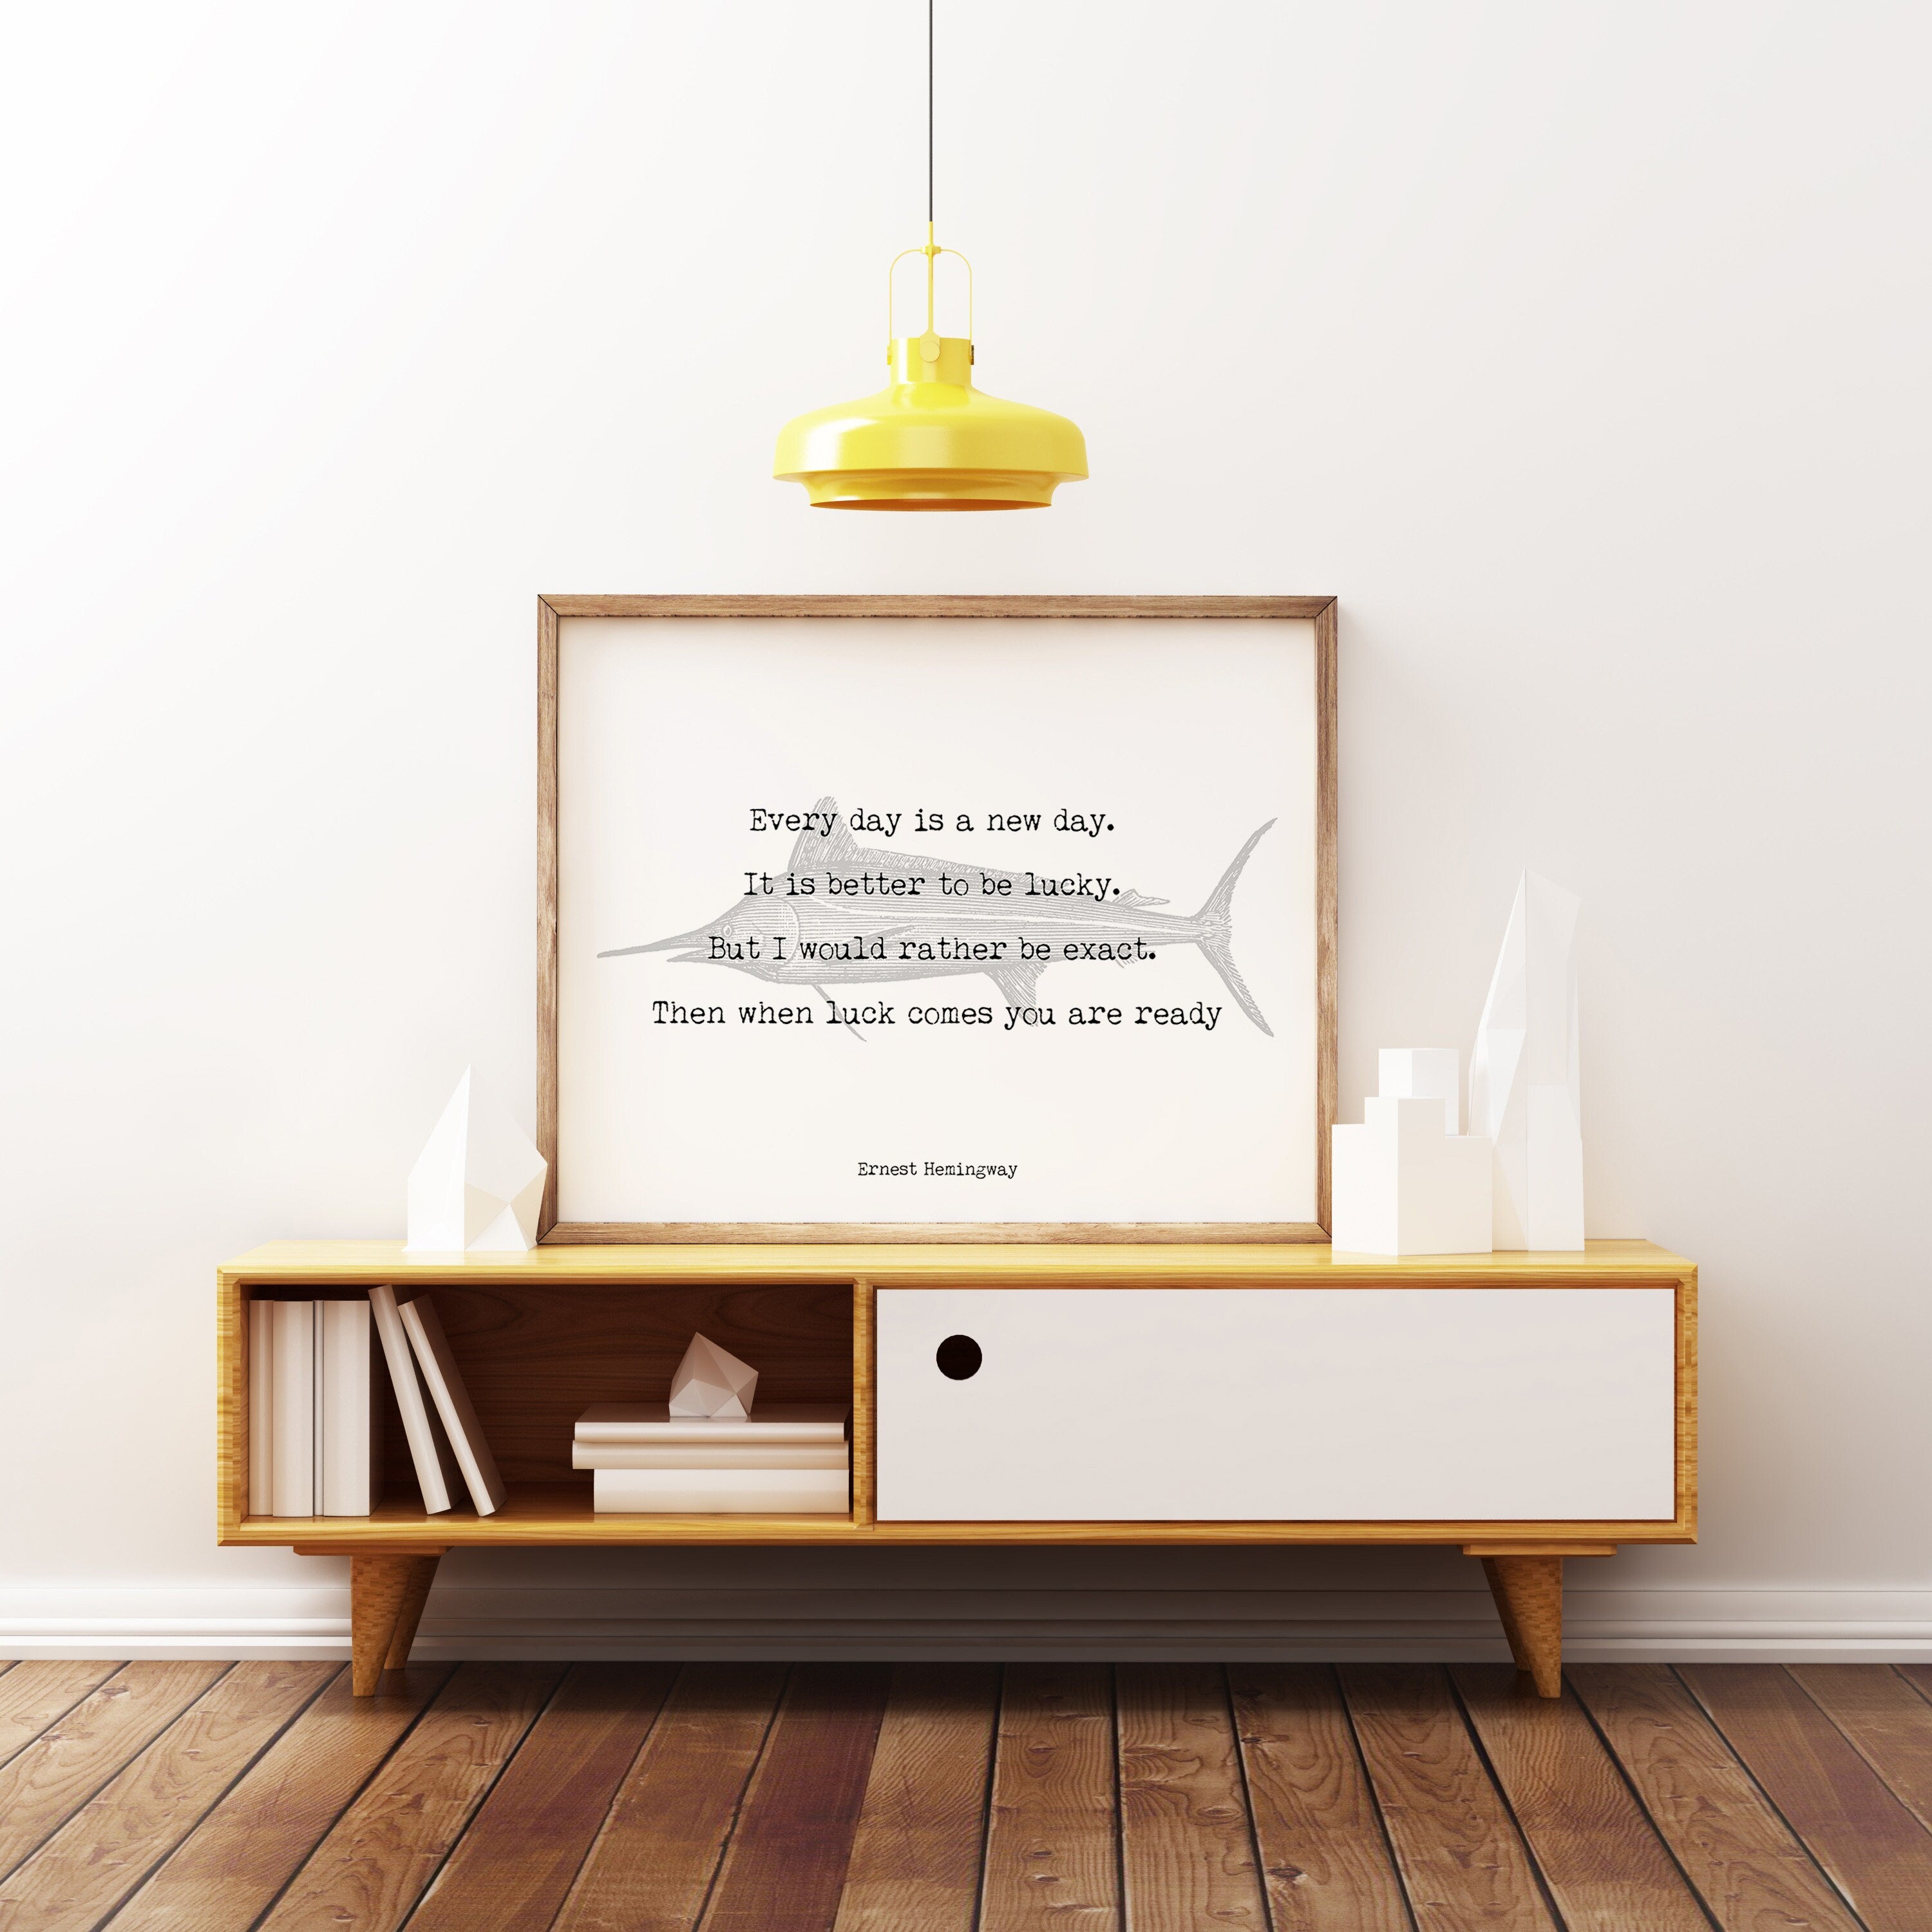 Ernest Hemingway The Old Man and the Sea Quote, Every Day Is A New Day - Inspirational Fishing Quote Print from unframed wall art print